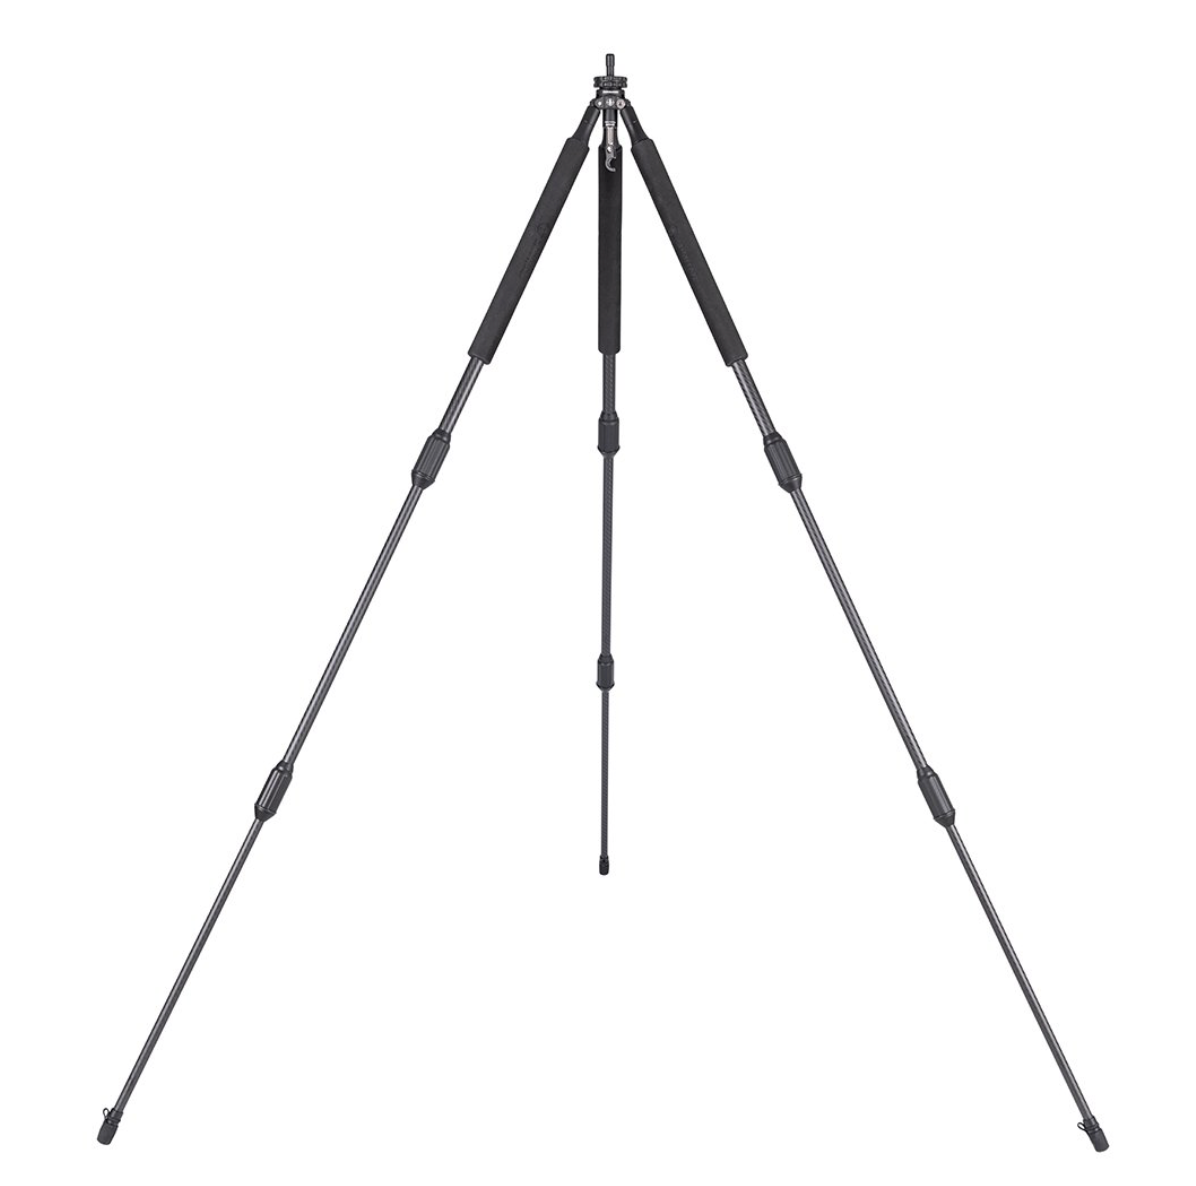 Spartan Precision Sentinel Tripod Woodland - Tall -  - Mansfield Hunting & Fishing - Products to prepare for Corona Virus